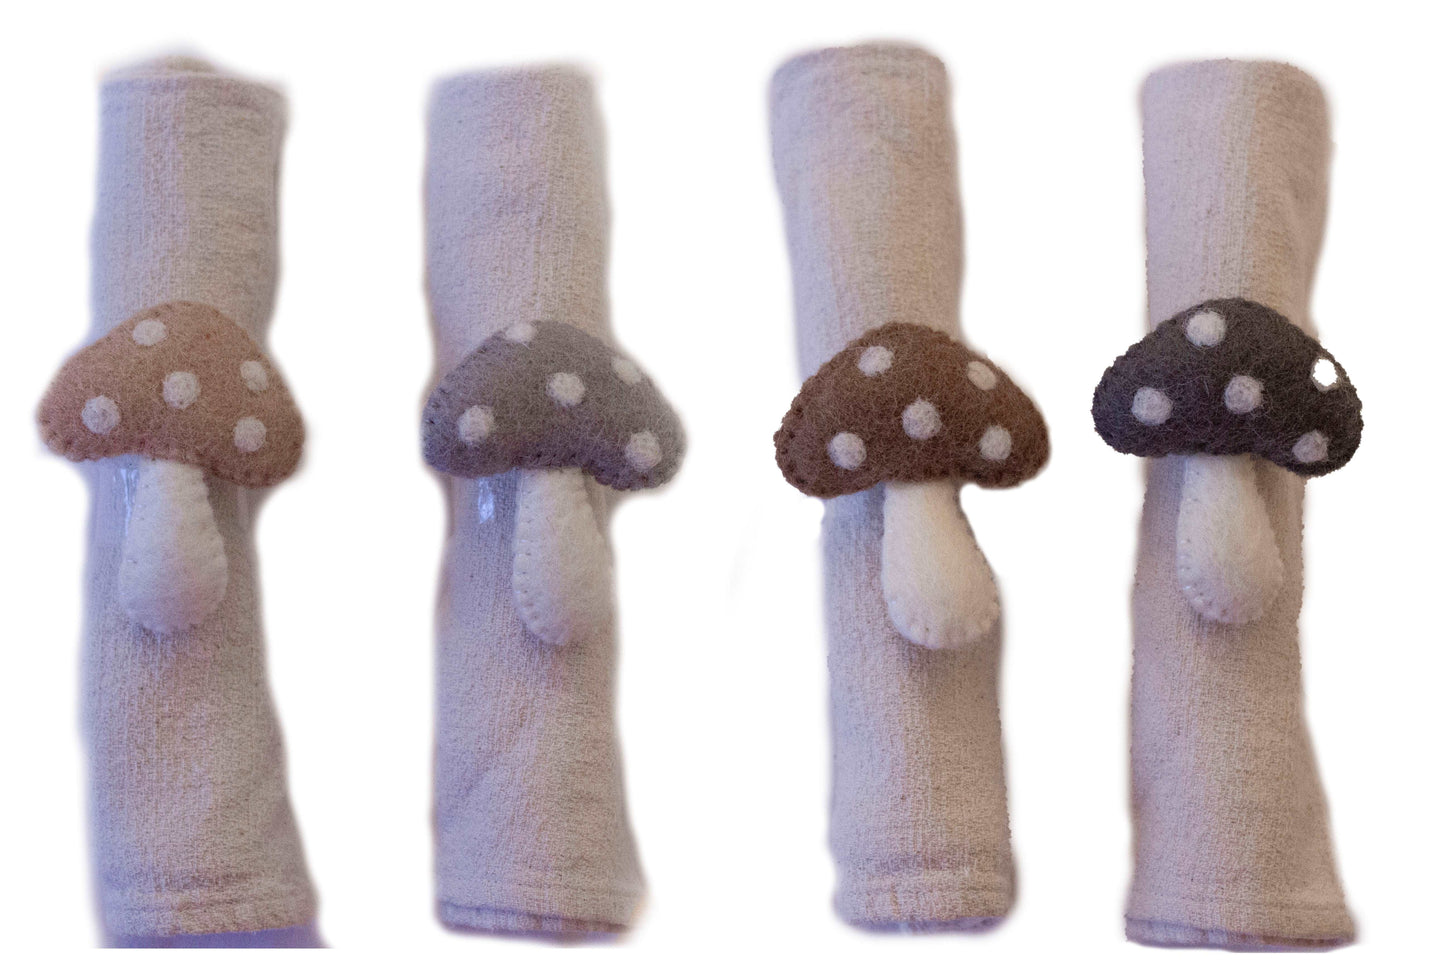 This Global Groove Life, handmade, ethical, fair trade, eco-friendly, sustainable, felt Mushroom Napkin Ring set was created by artisans in Kathmandu Nepal and will bring colorful warmth and functionality to your table top.